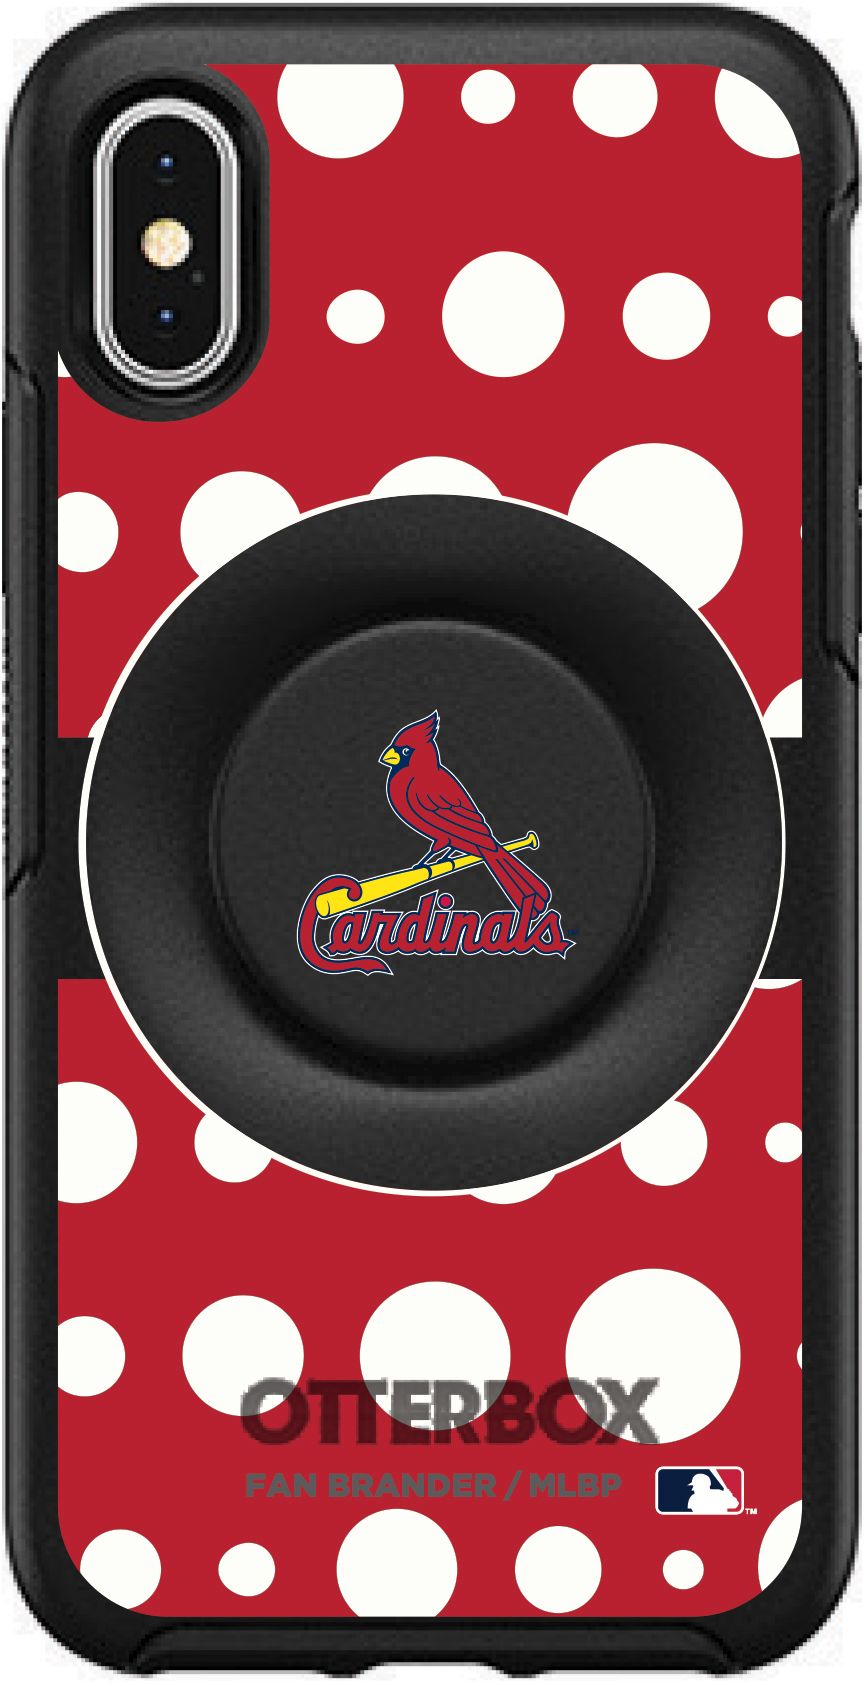 Otterbox / St. Louis Cardinals Polka Dot iPhone Case with PopSocket